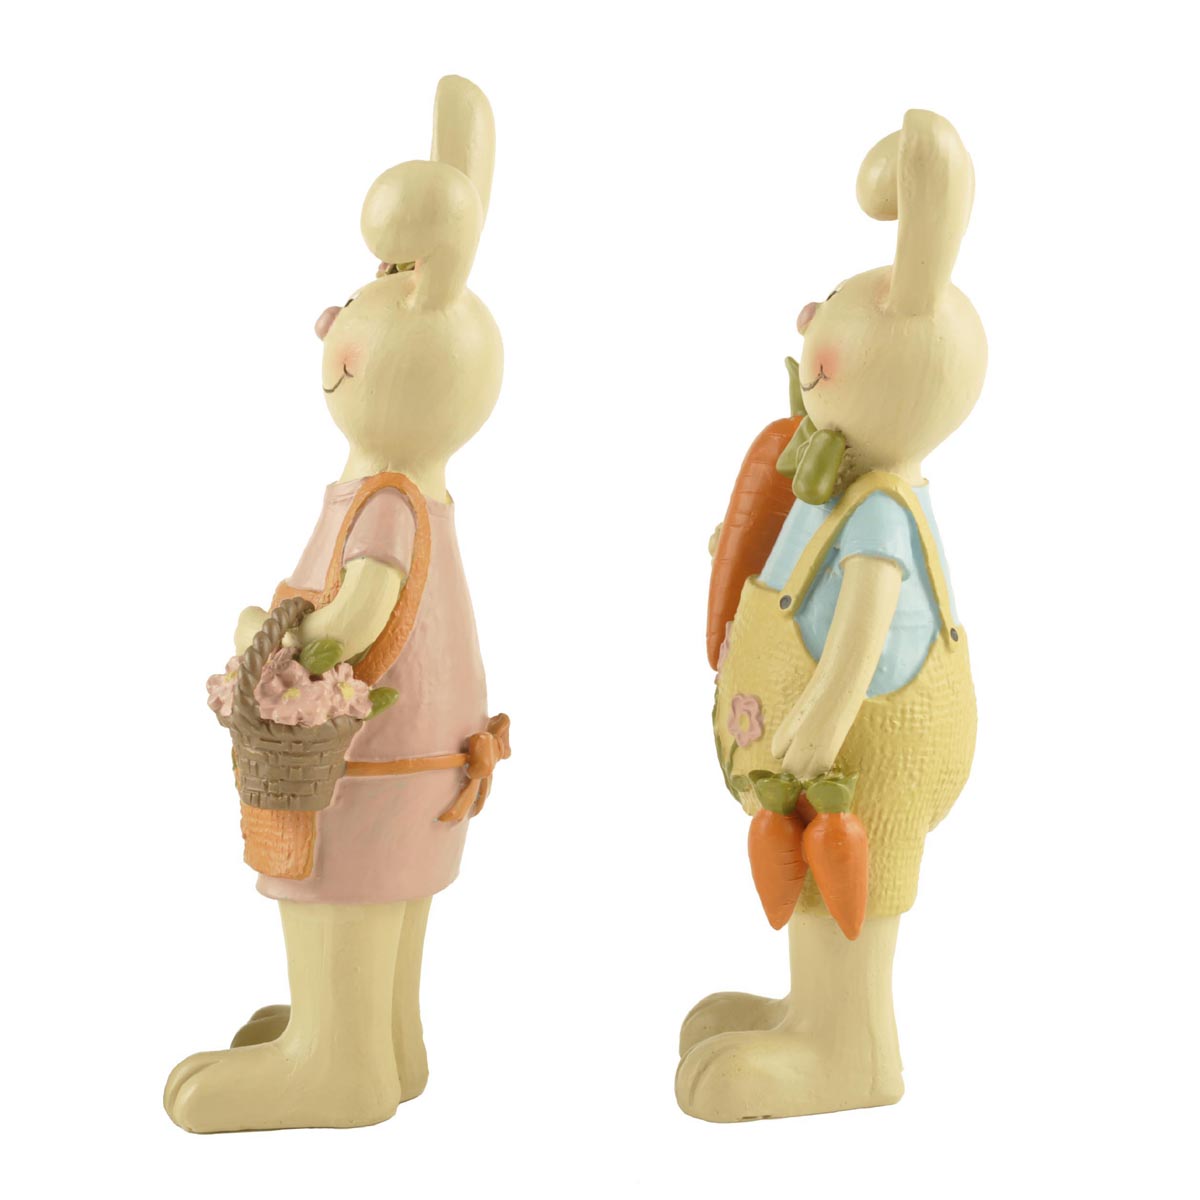 Ennas easter figurines polyresin for holiday gift-1